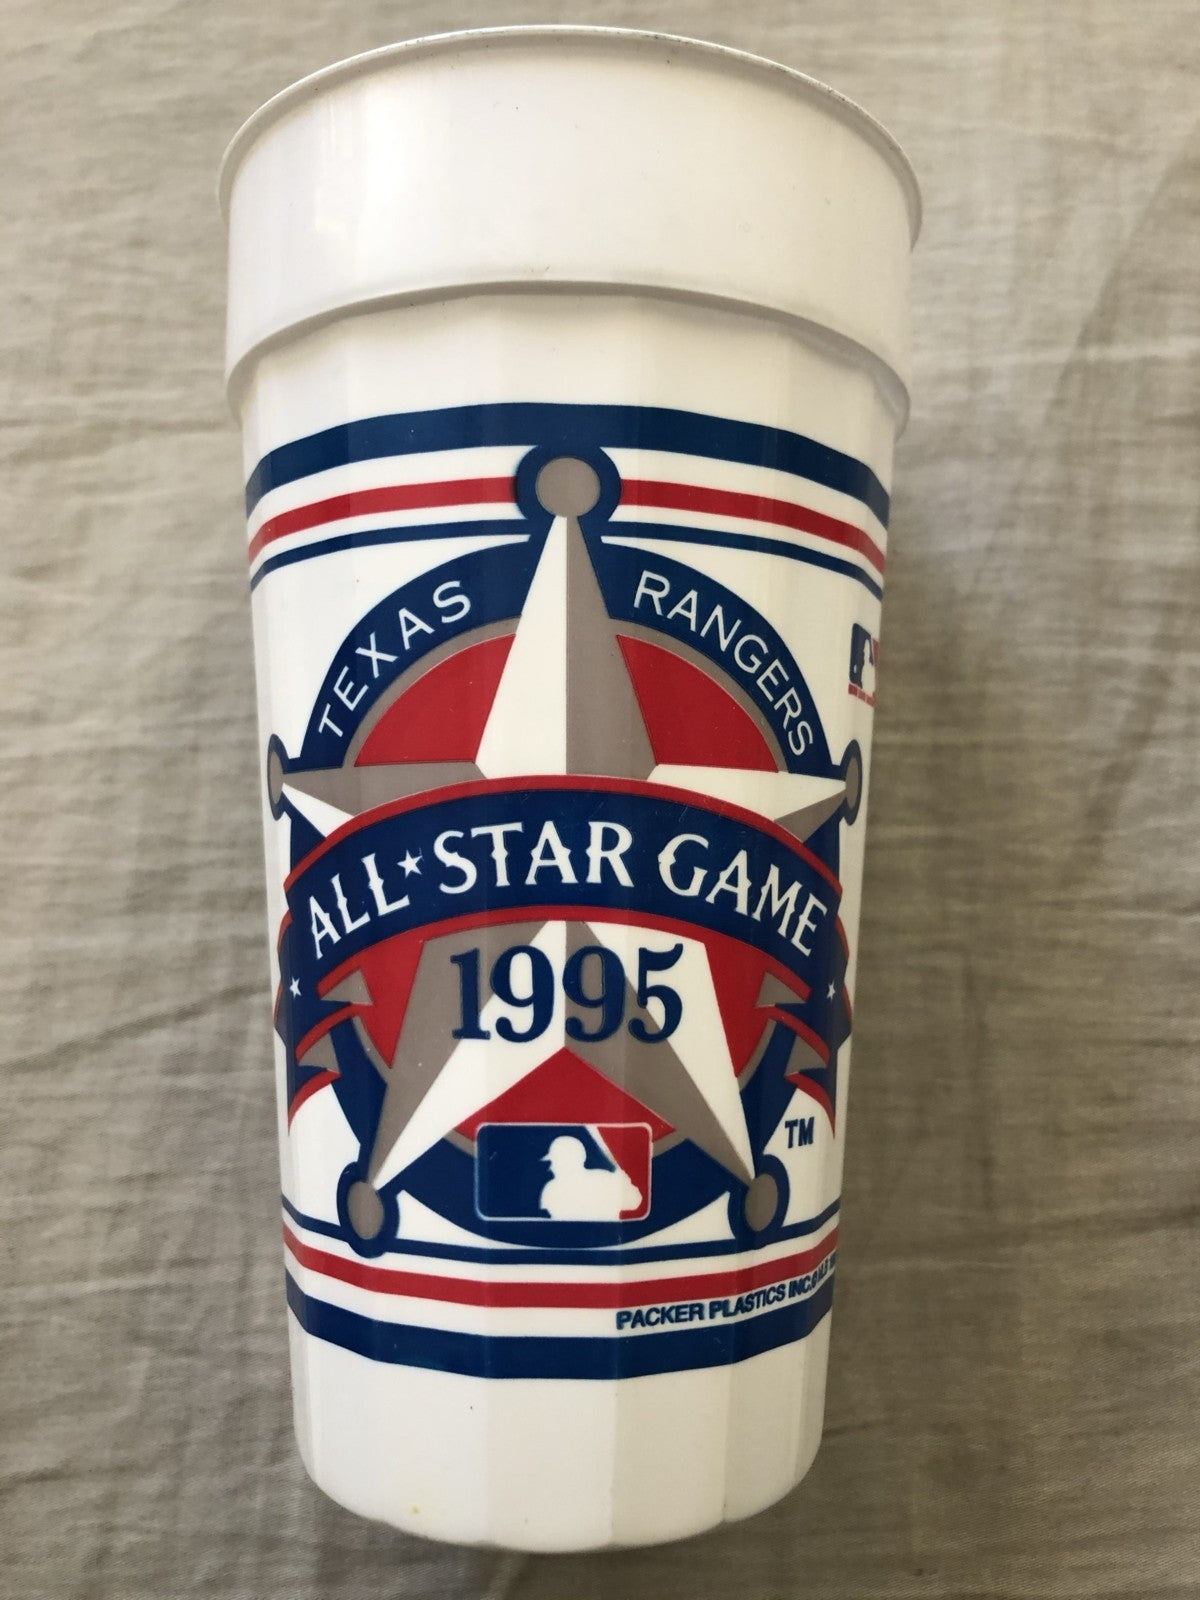 Texas Rangers 1995 All-Star Game commemorative plastic cup